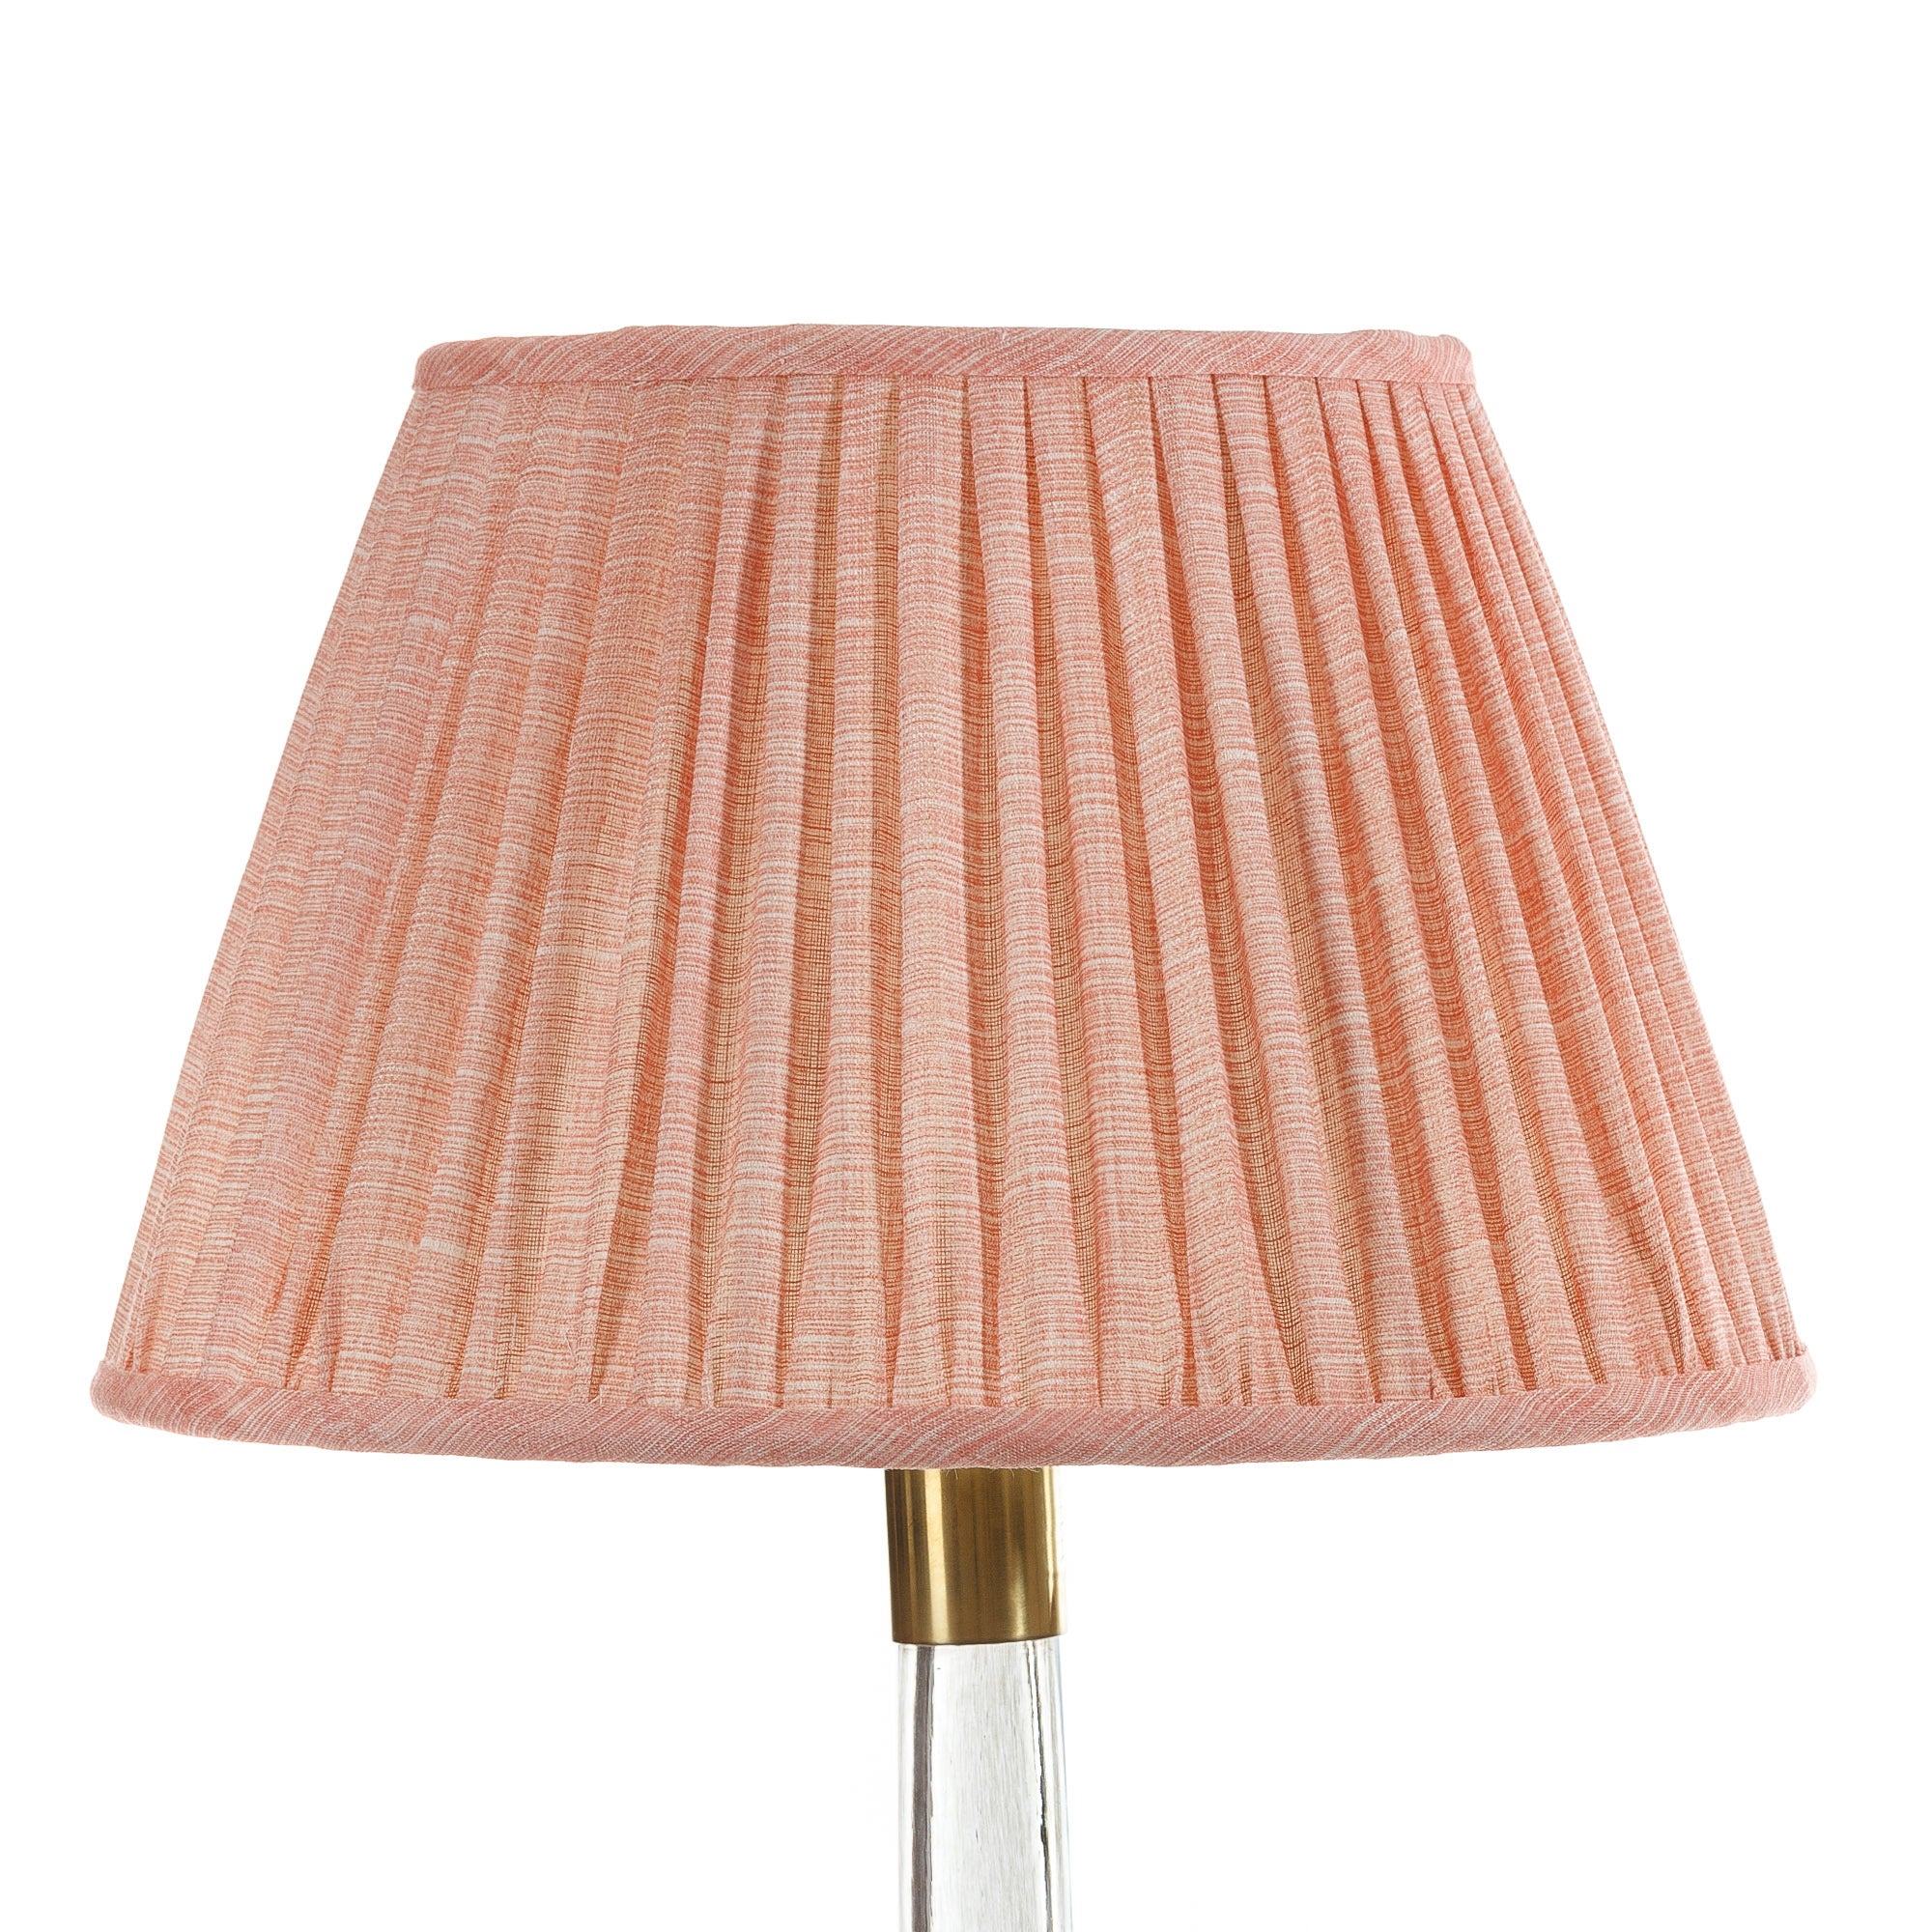 8" Fermoie Lampshade - Moire Linen in Pink